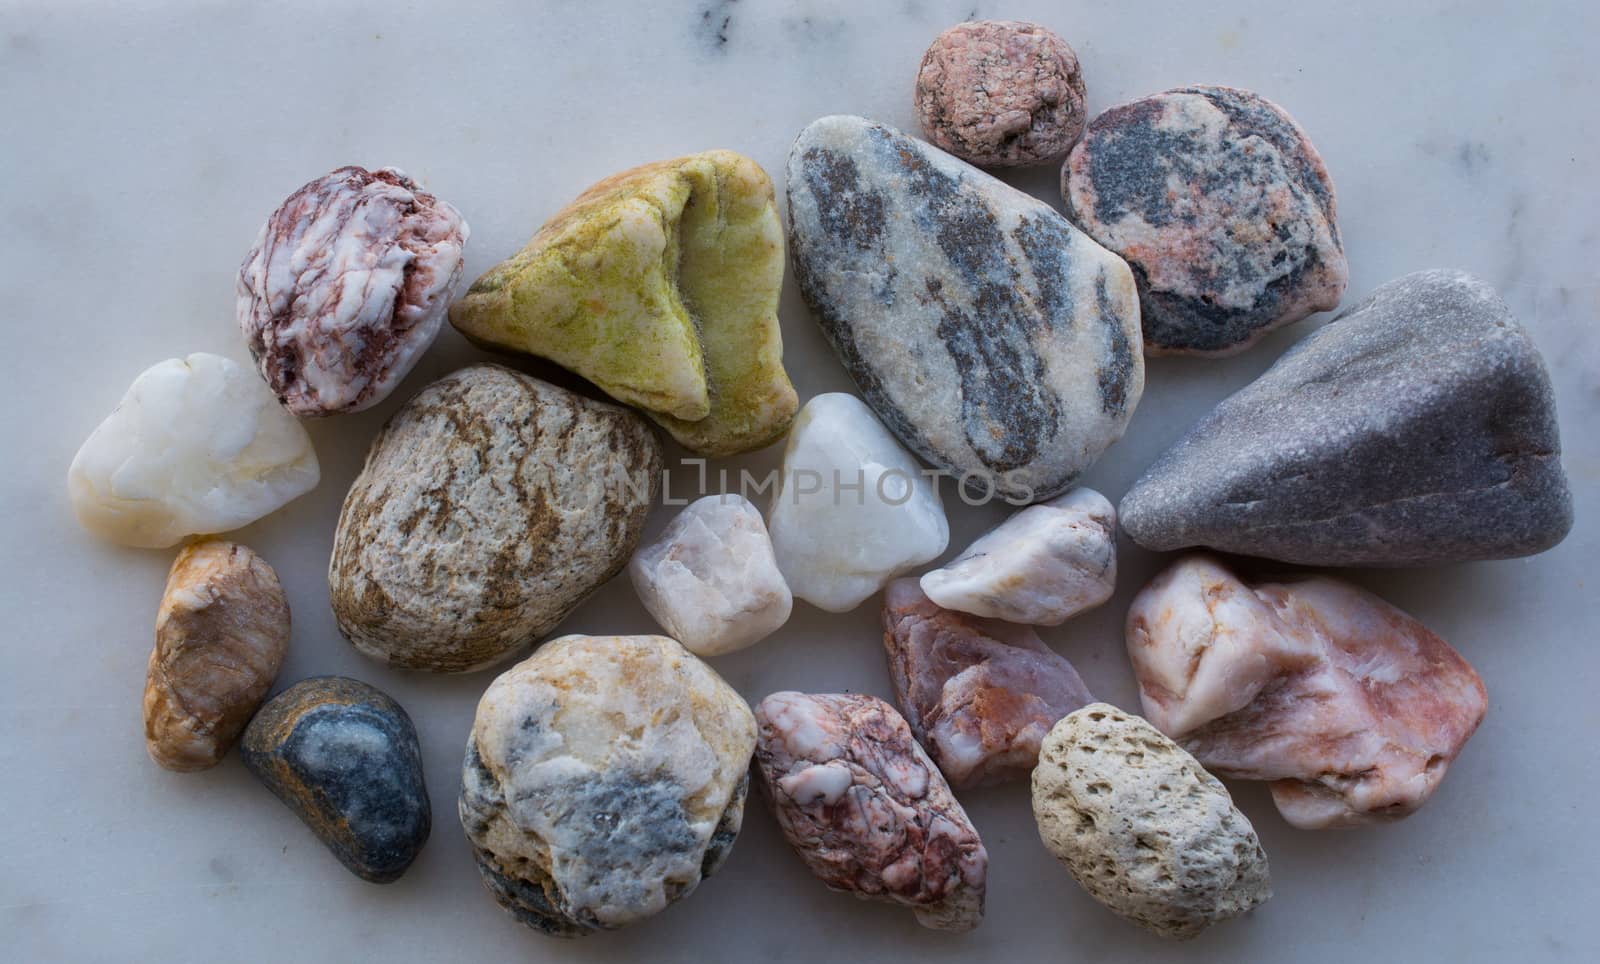 Stones in various shapes, colors and sizes.